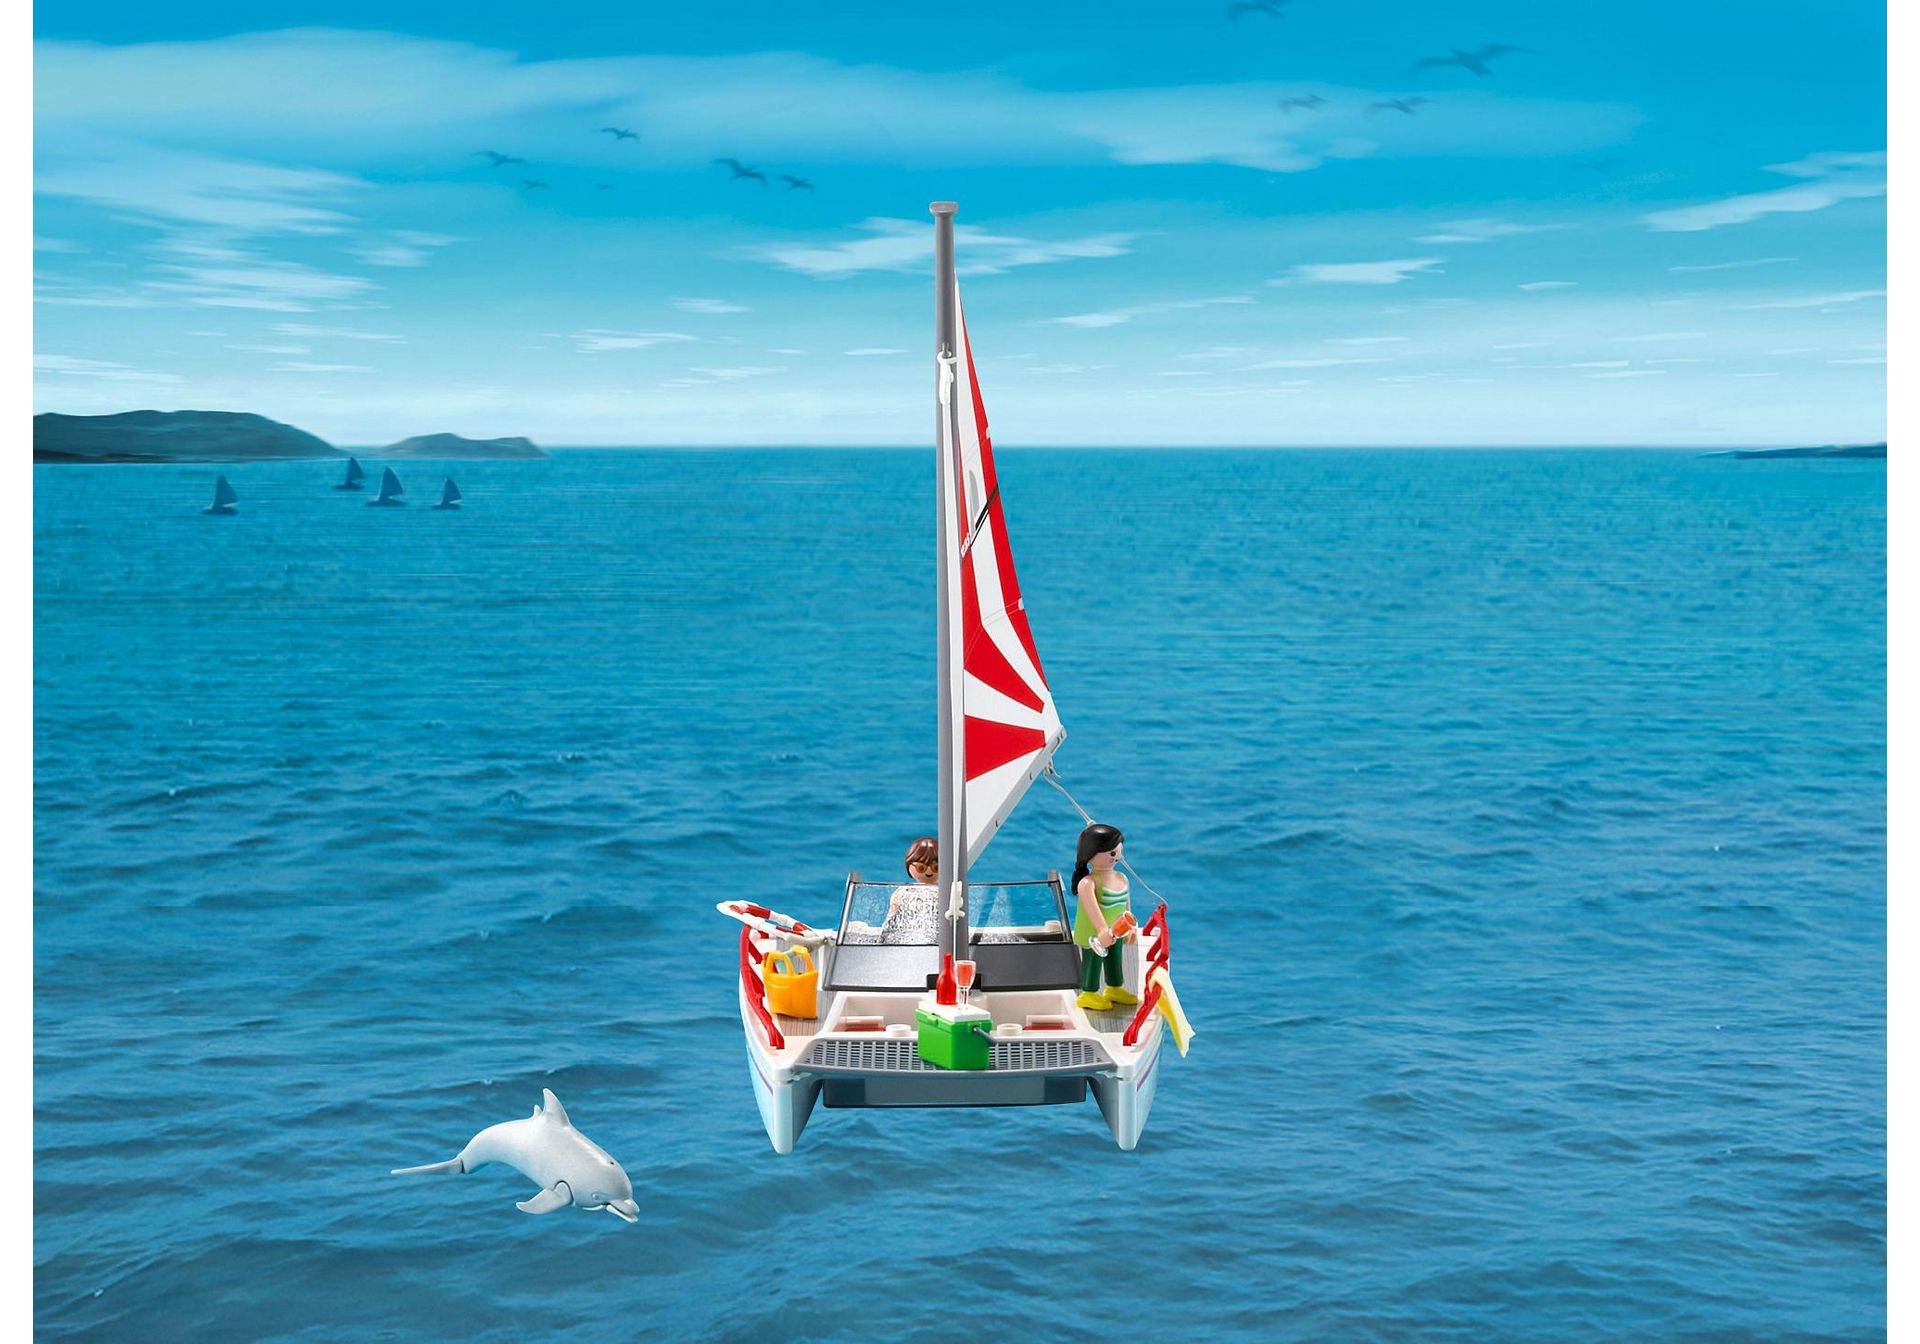 Details about   Playmobil catamaran 5130 boat ocean sea dolphin coin alternatives to choice show original title 